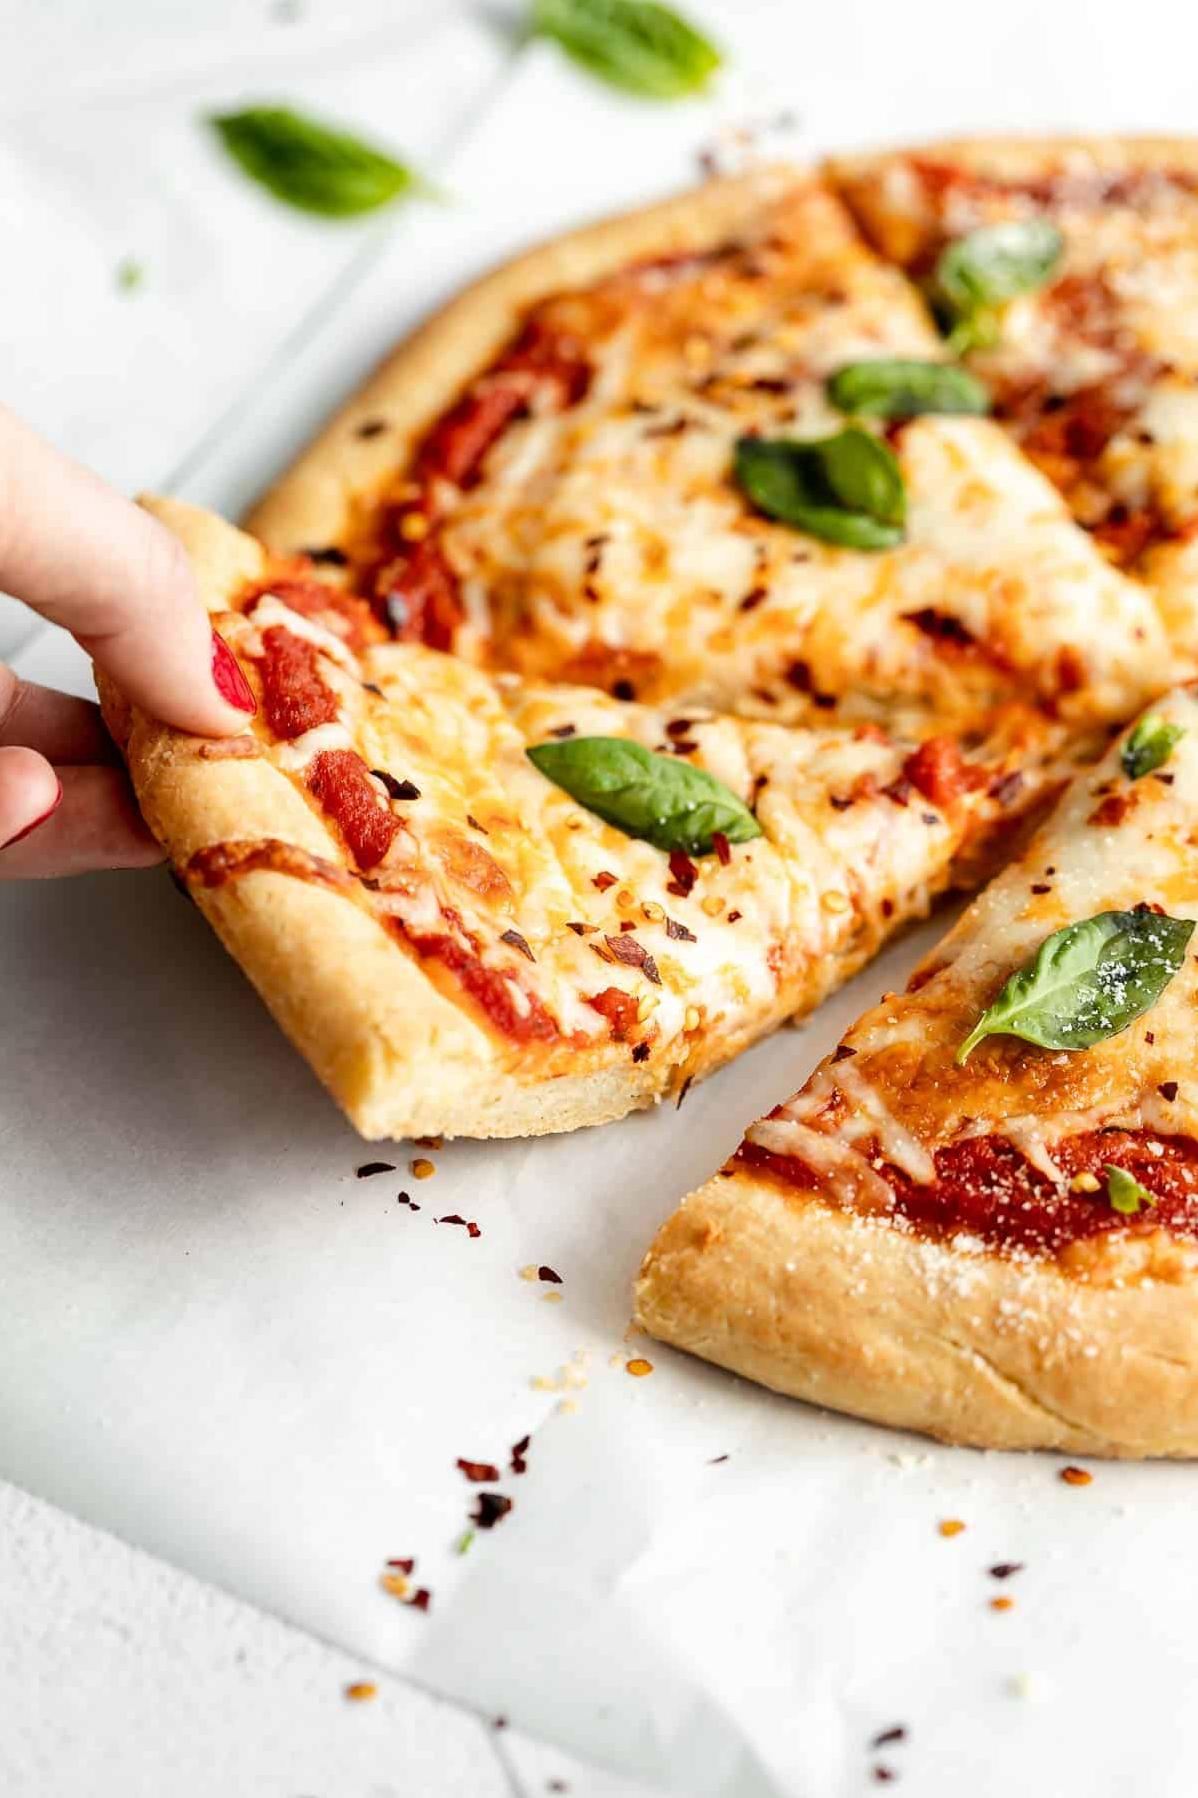  No need to sacrifice flavor with this delicious gluten-free pizza crust.